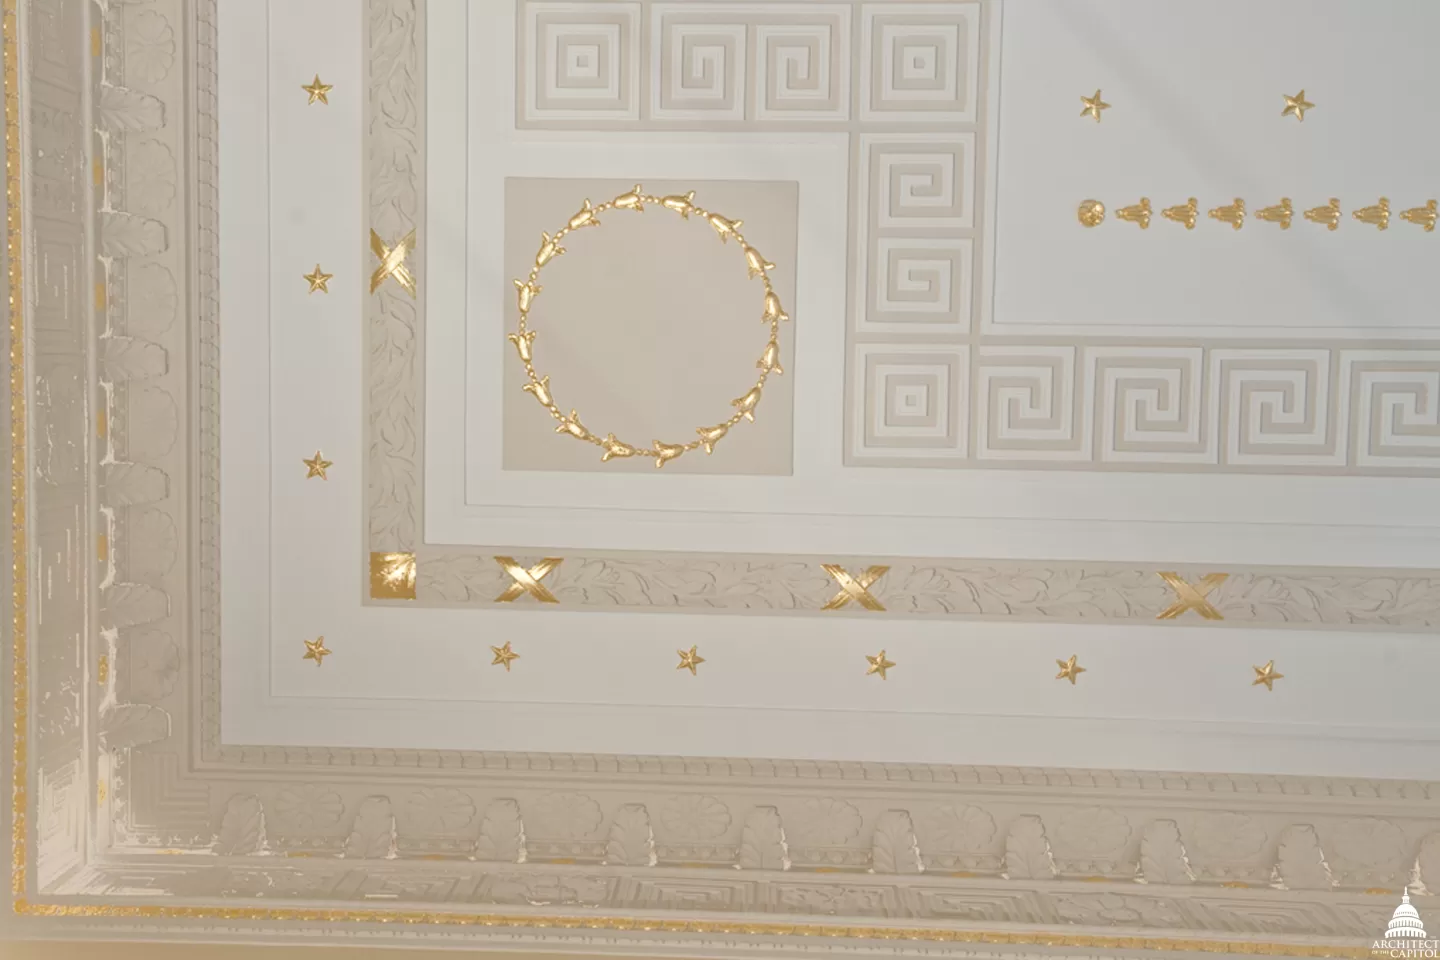 Example of decorative ceiling in the Longworth Building.